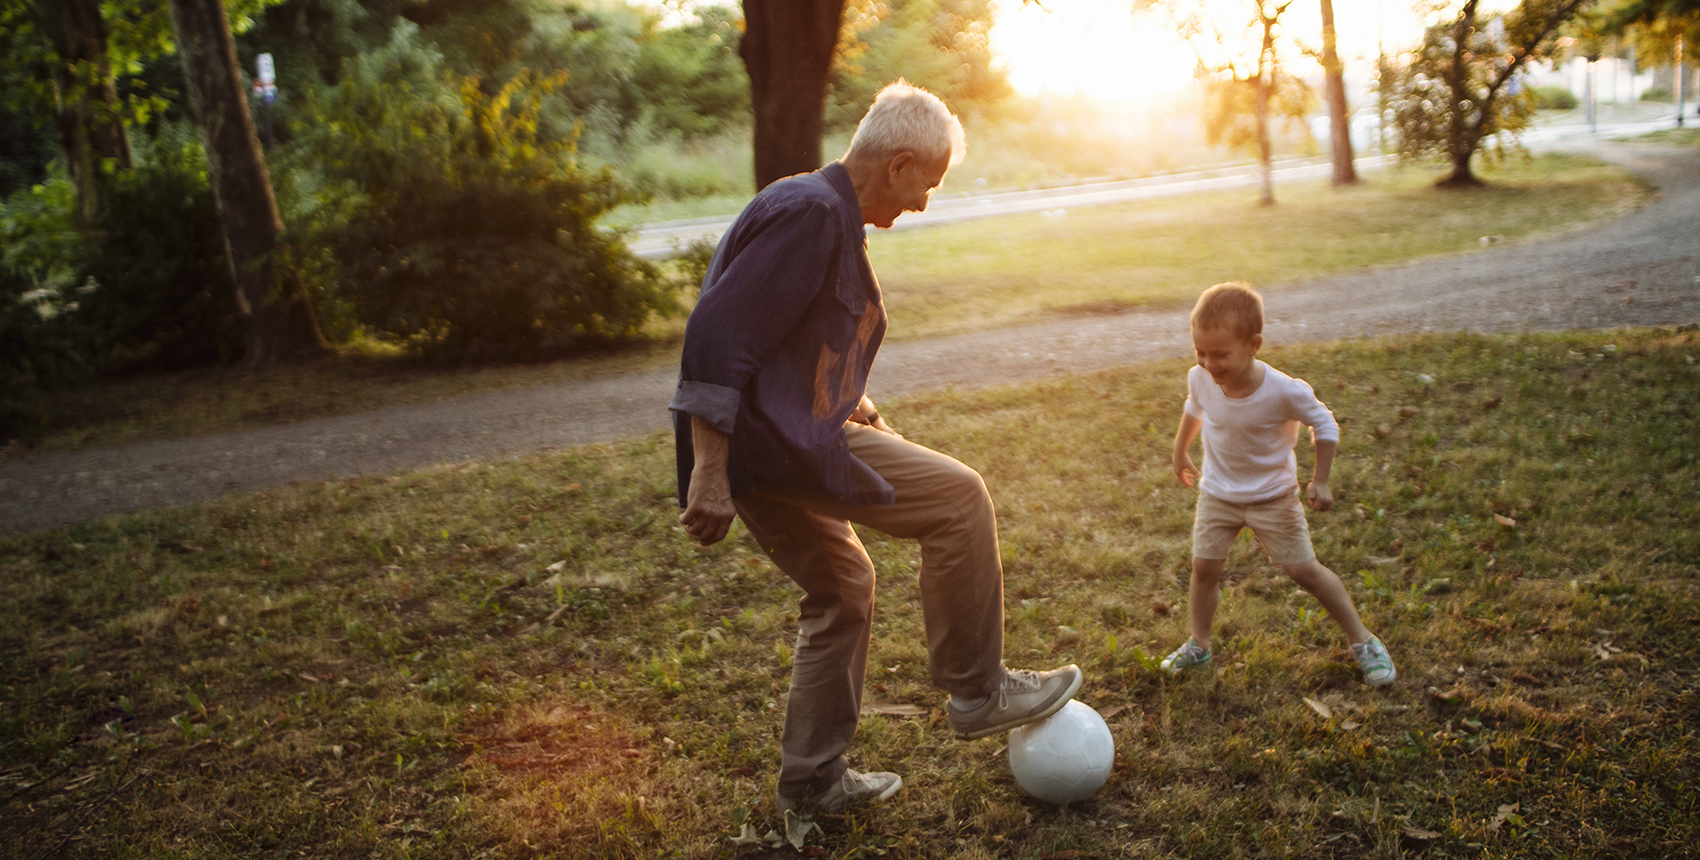 Caught in the middle of a one-on-one soccer game, a wite-haired man stands with his foot on a soccer ball, a small child faces him, poised to take the ball.